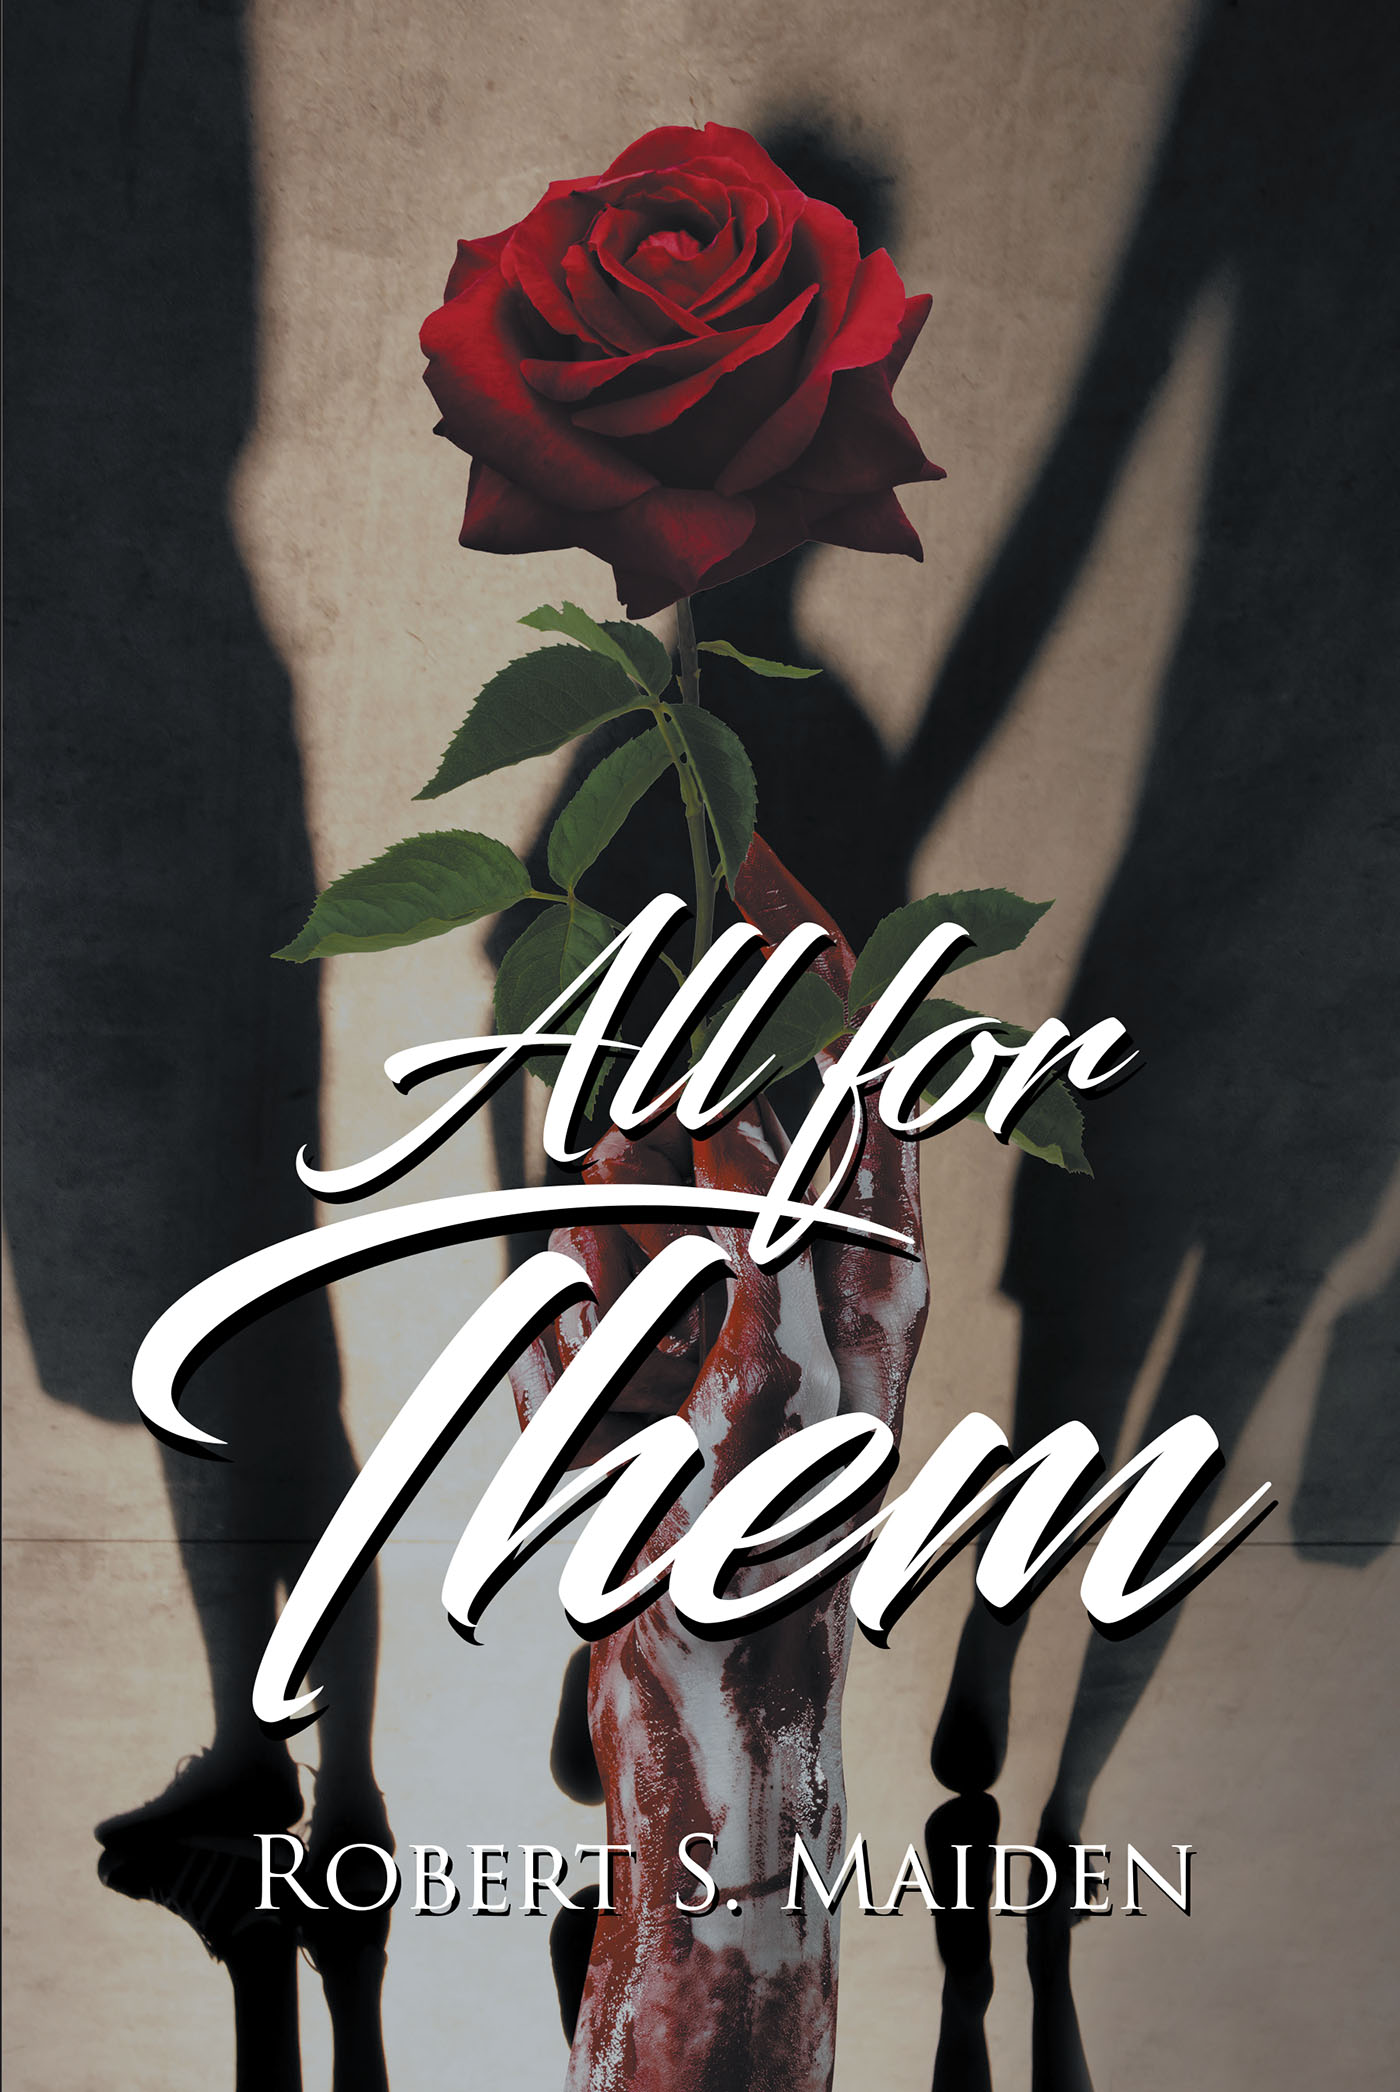 Author Robert S. Maiden’s New Book, "All for Them," is a Rivetingly Eerie Tale of Destiny and Horror as a Young Girl is Befriended by the Grim Reaper Himself